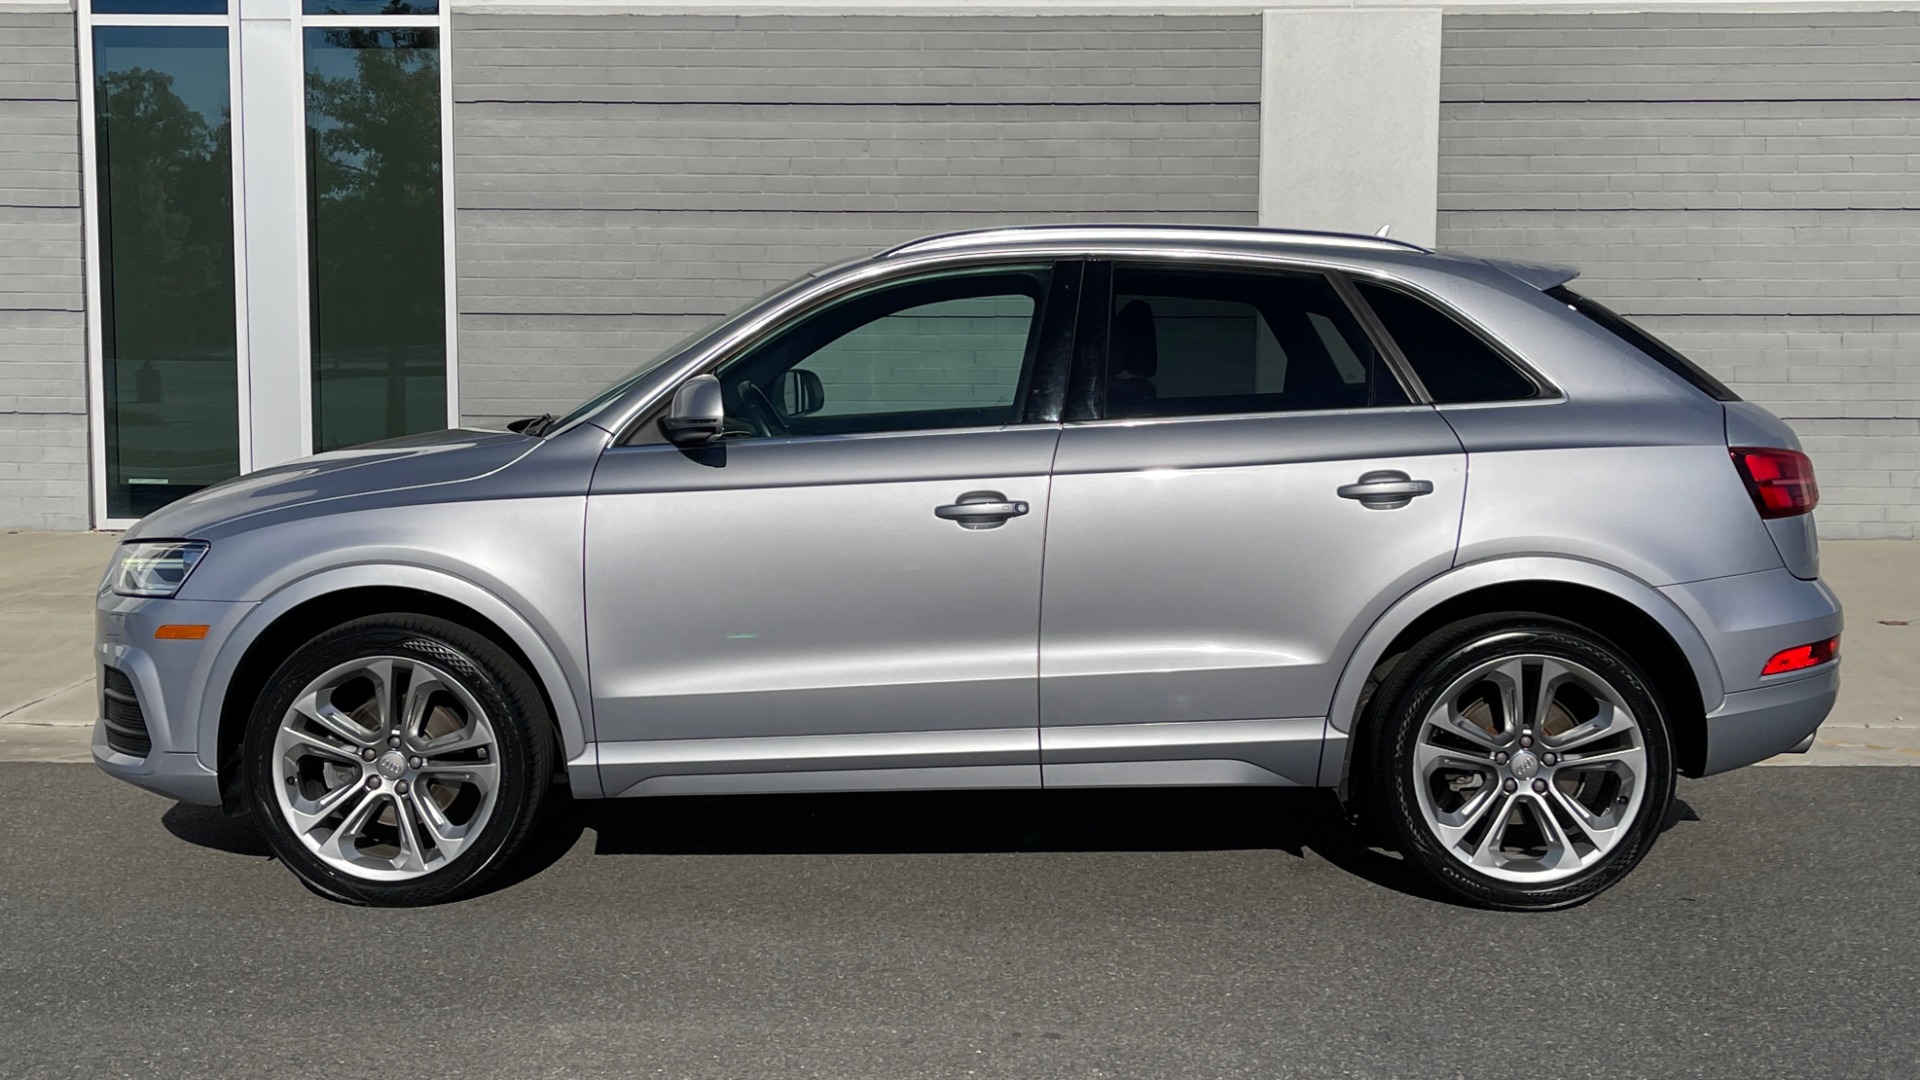 Used 2016 Audi Q3 PREMIUM PLUS 2.0L / PANO-ROOF / HTD STS / 19IN WHEELS / REARVIEW for sale Sold at Formula Imports in Charlotte NC 28227 3